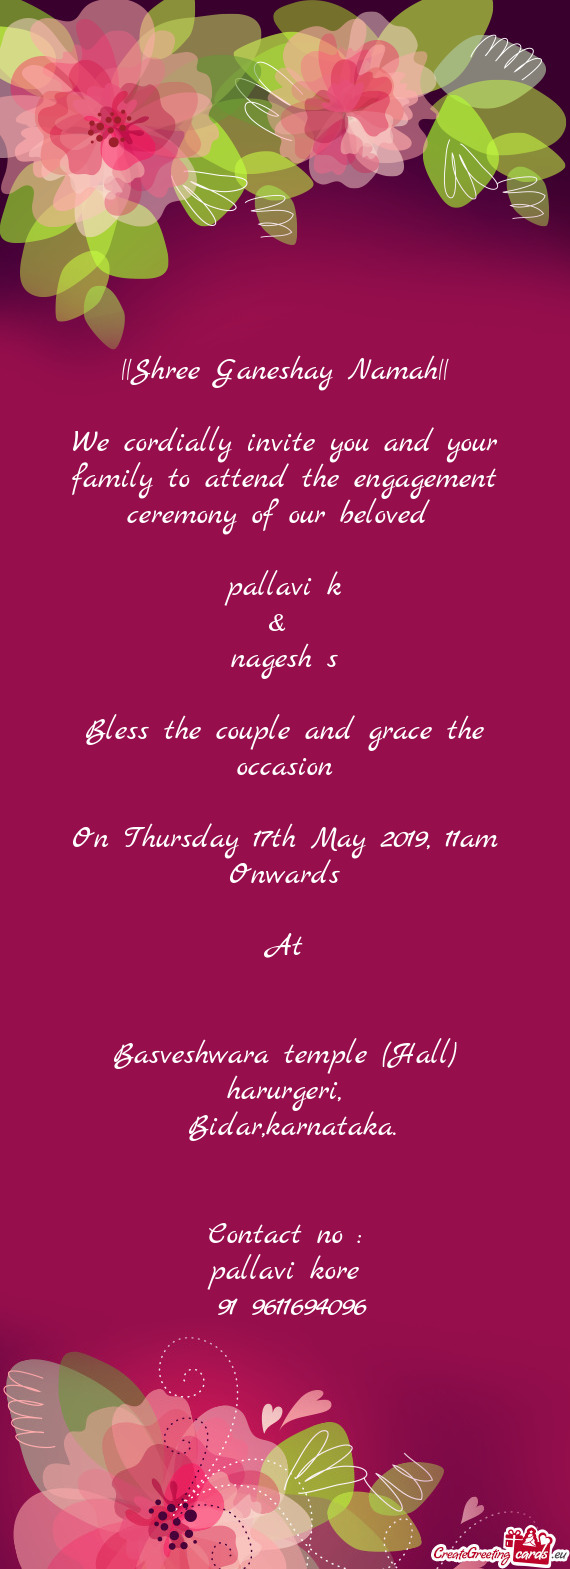 On Thursday 17th May 2019, 11am Onwards